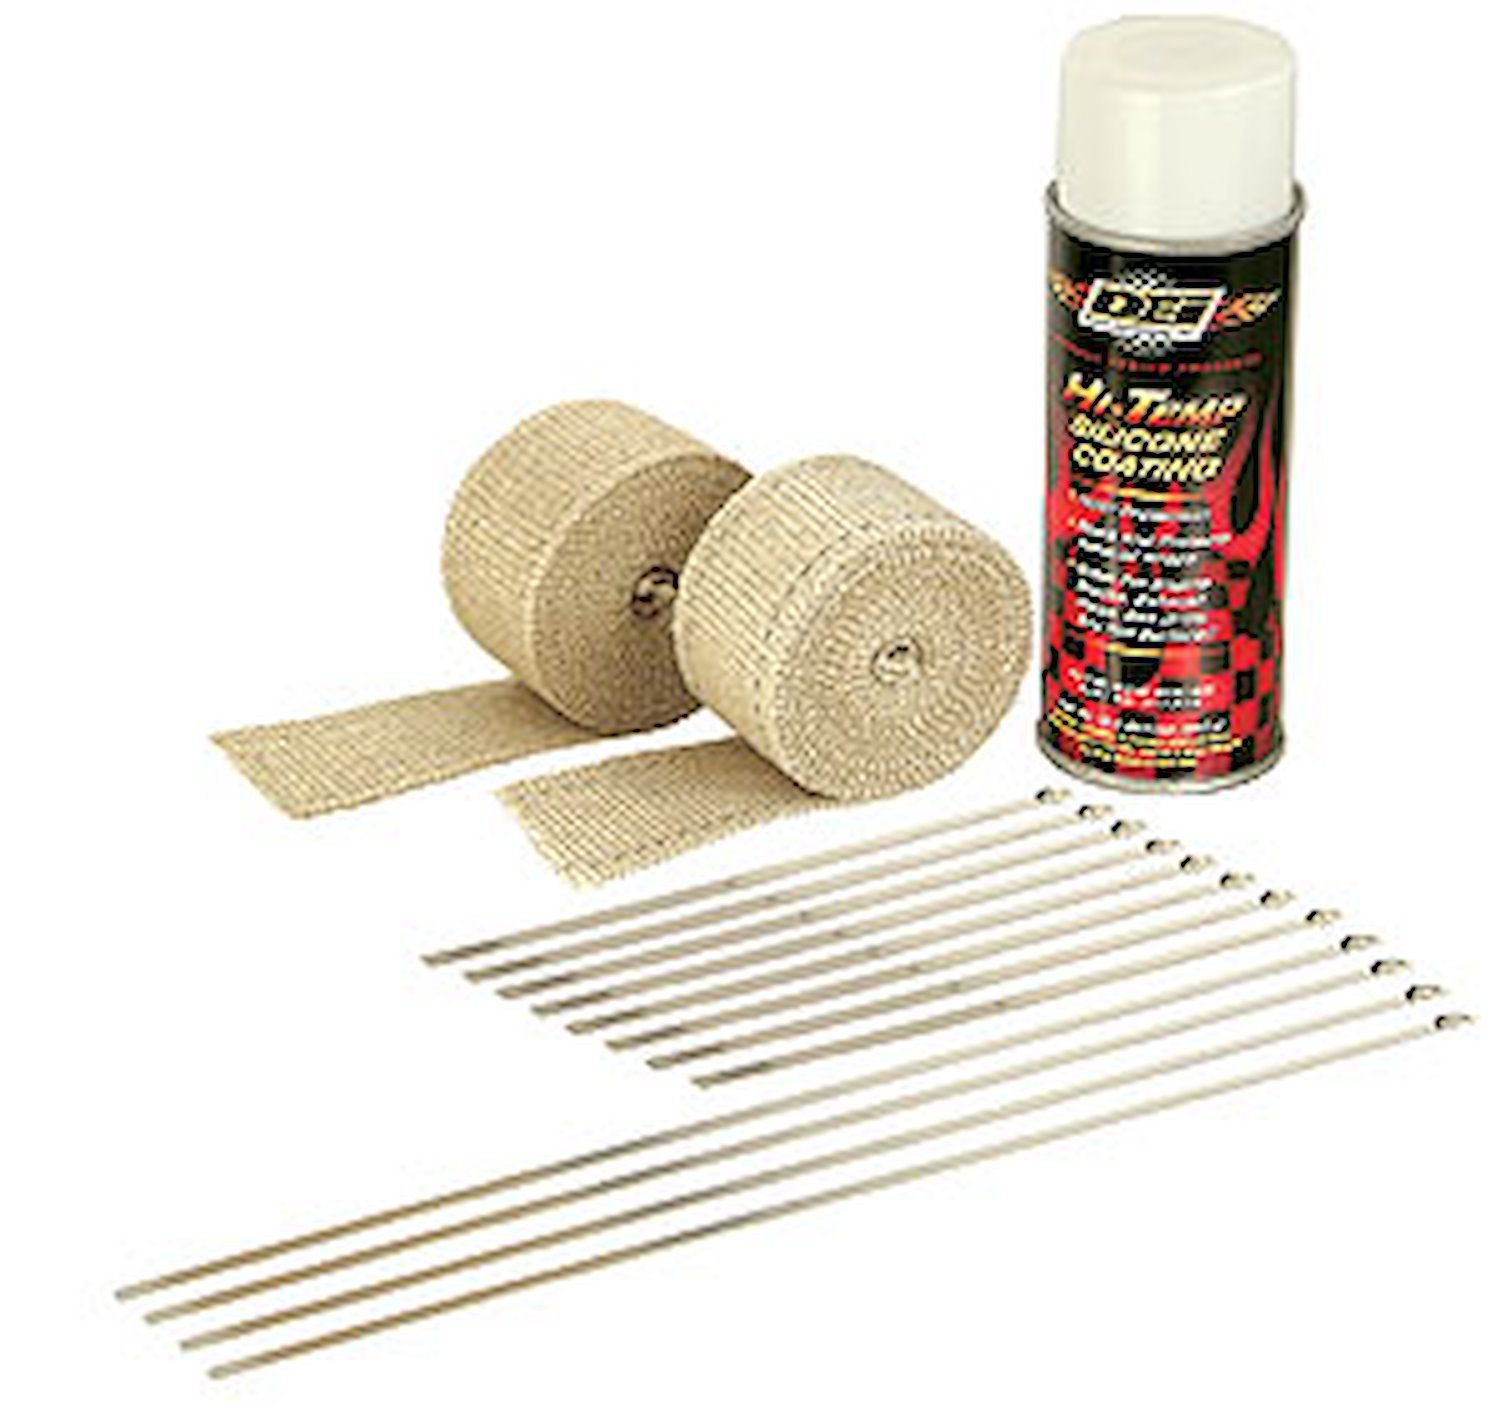 Motorcycle Exhaust Pipe Wrap Kit With White HT Silicone Coating